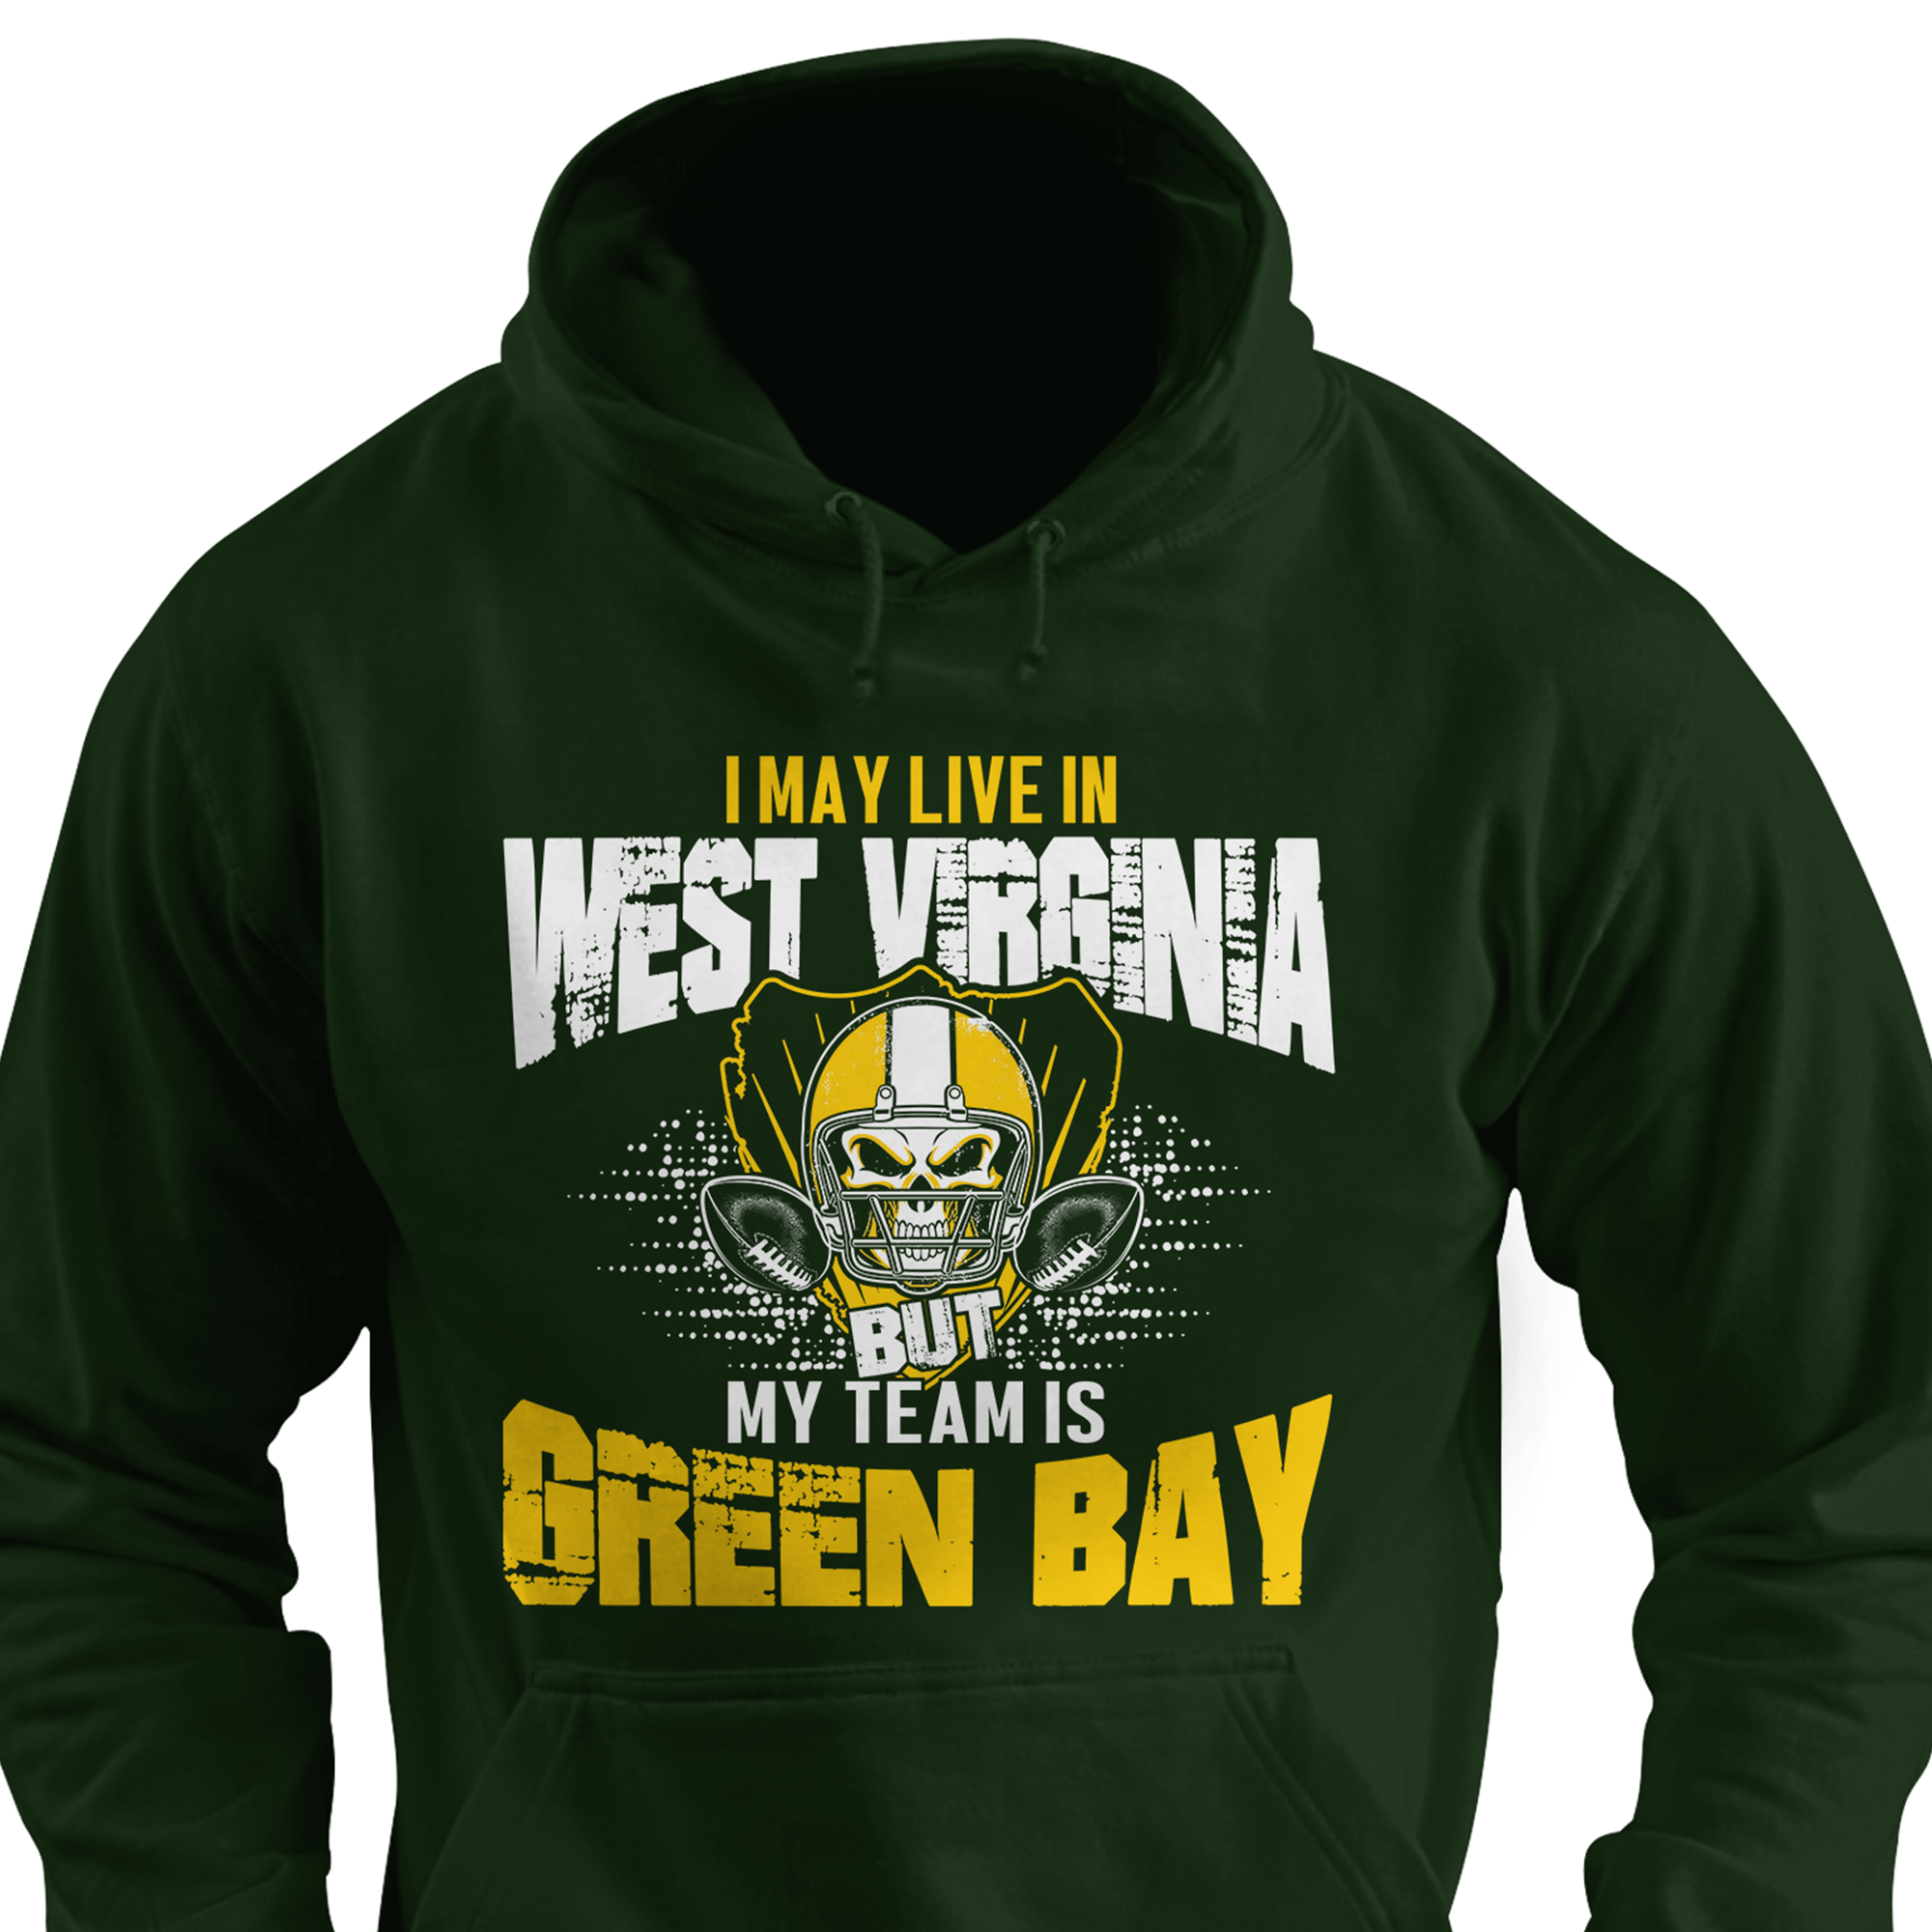 I May Live in West Virginia but My Team is Green Bay